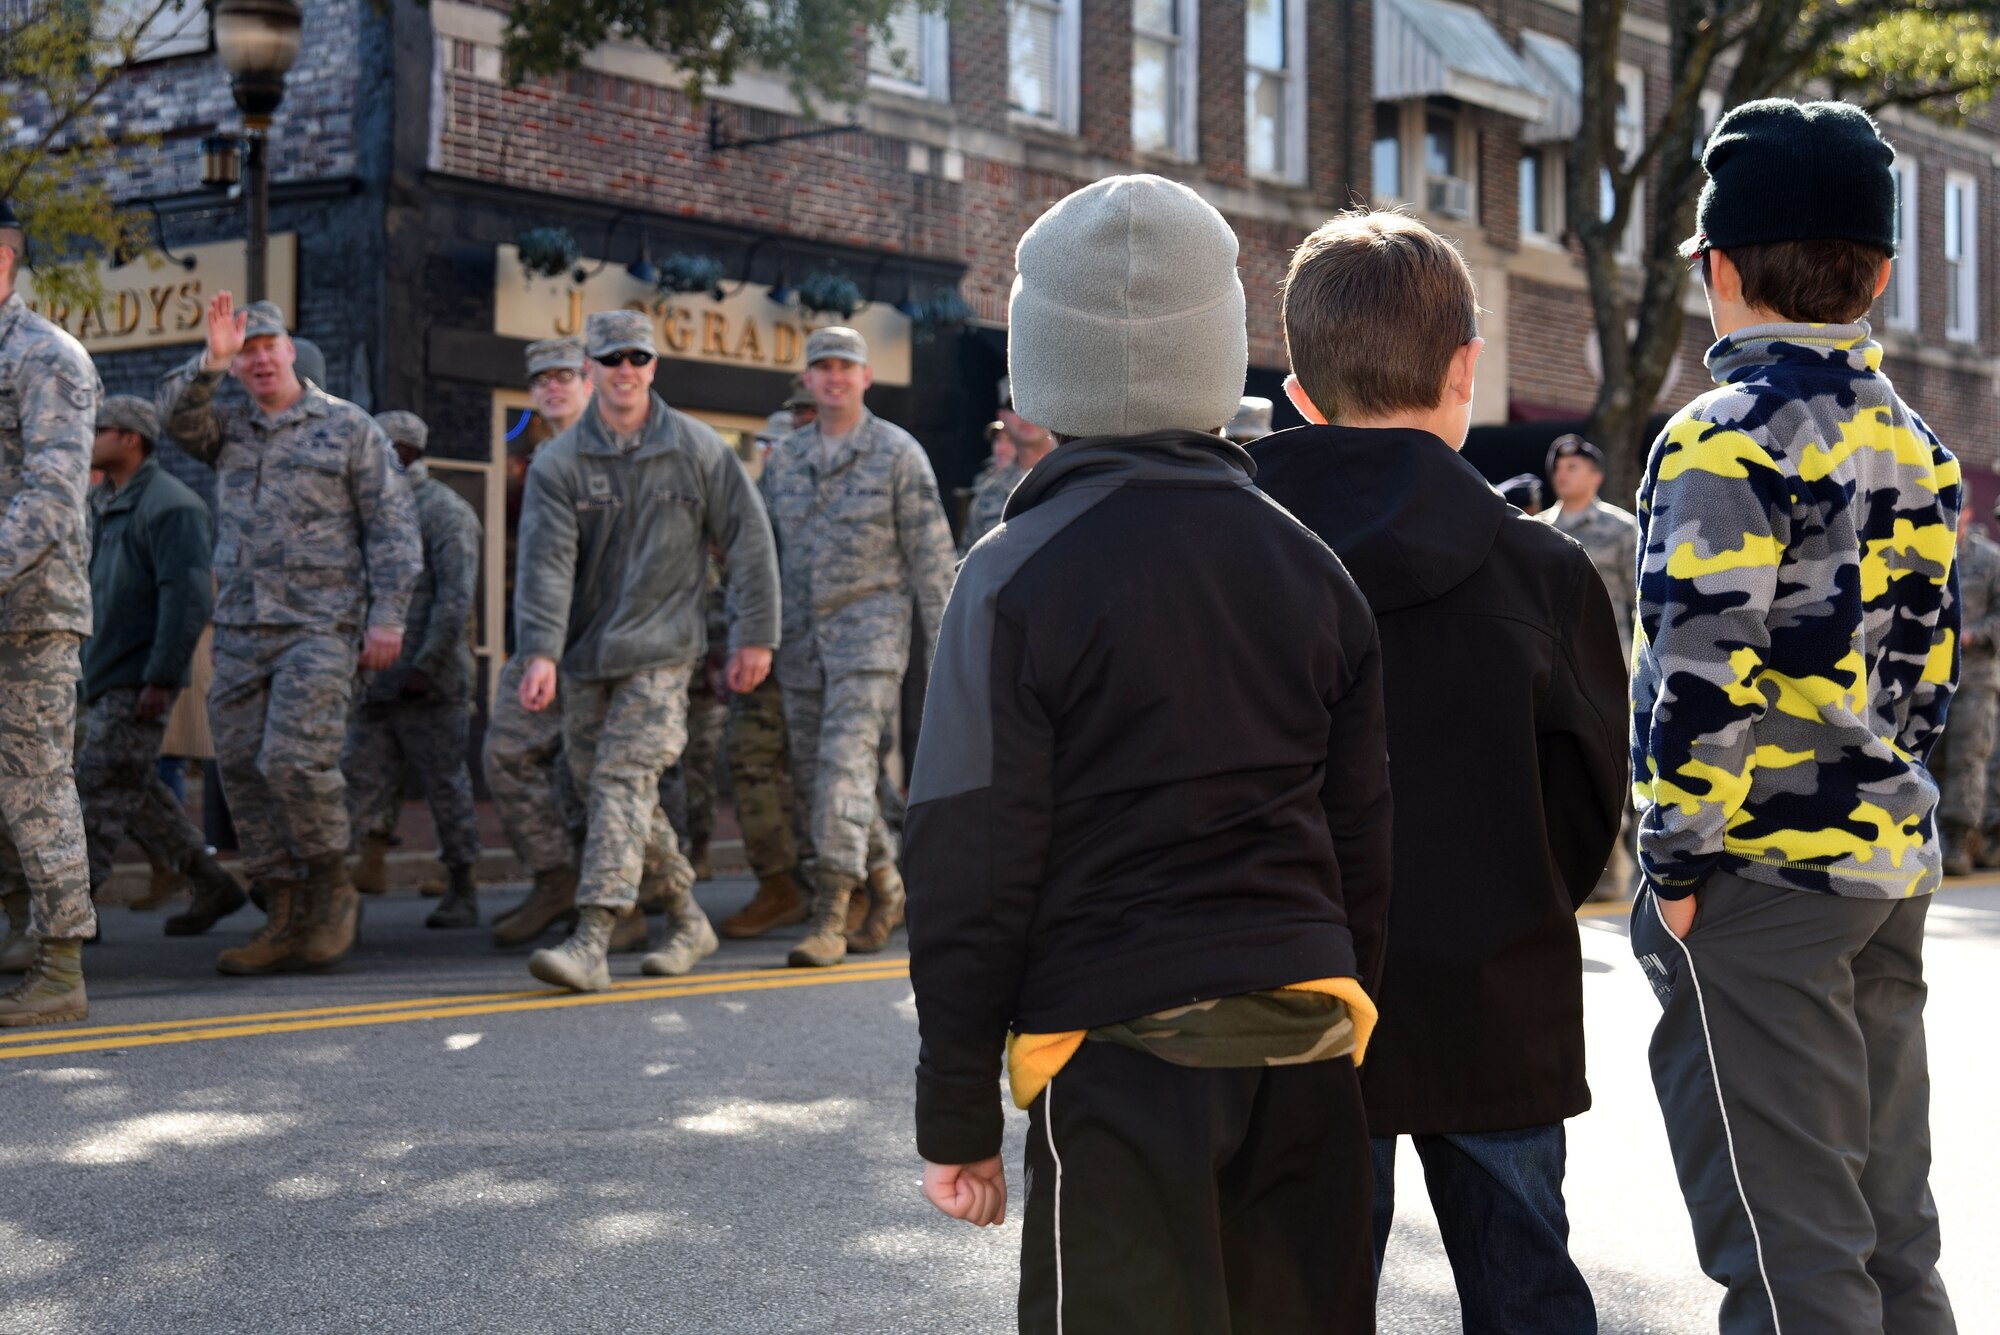 Children watch as U.S. Airmen and Soldiers walk past during a Veterans Day Celebration parade in Sumter, South Carolina, Nov. 11, 2017.